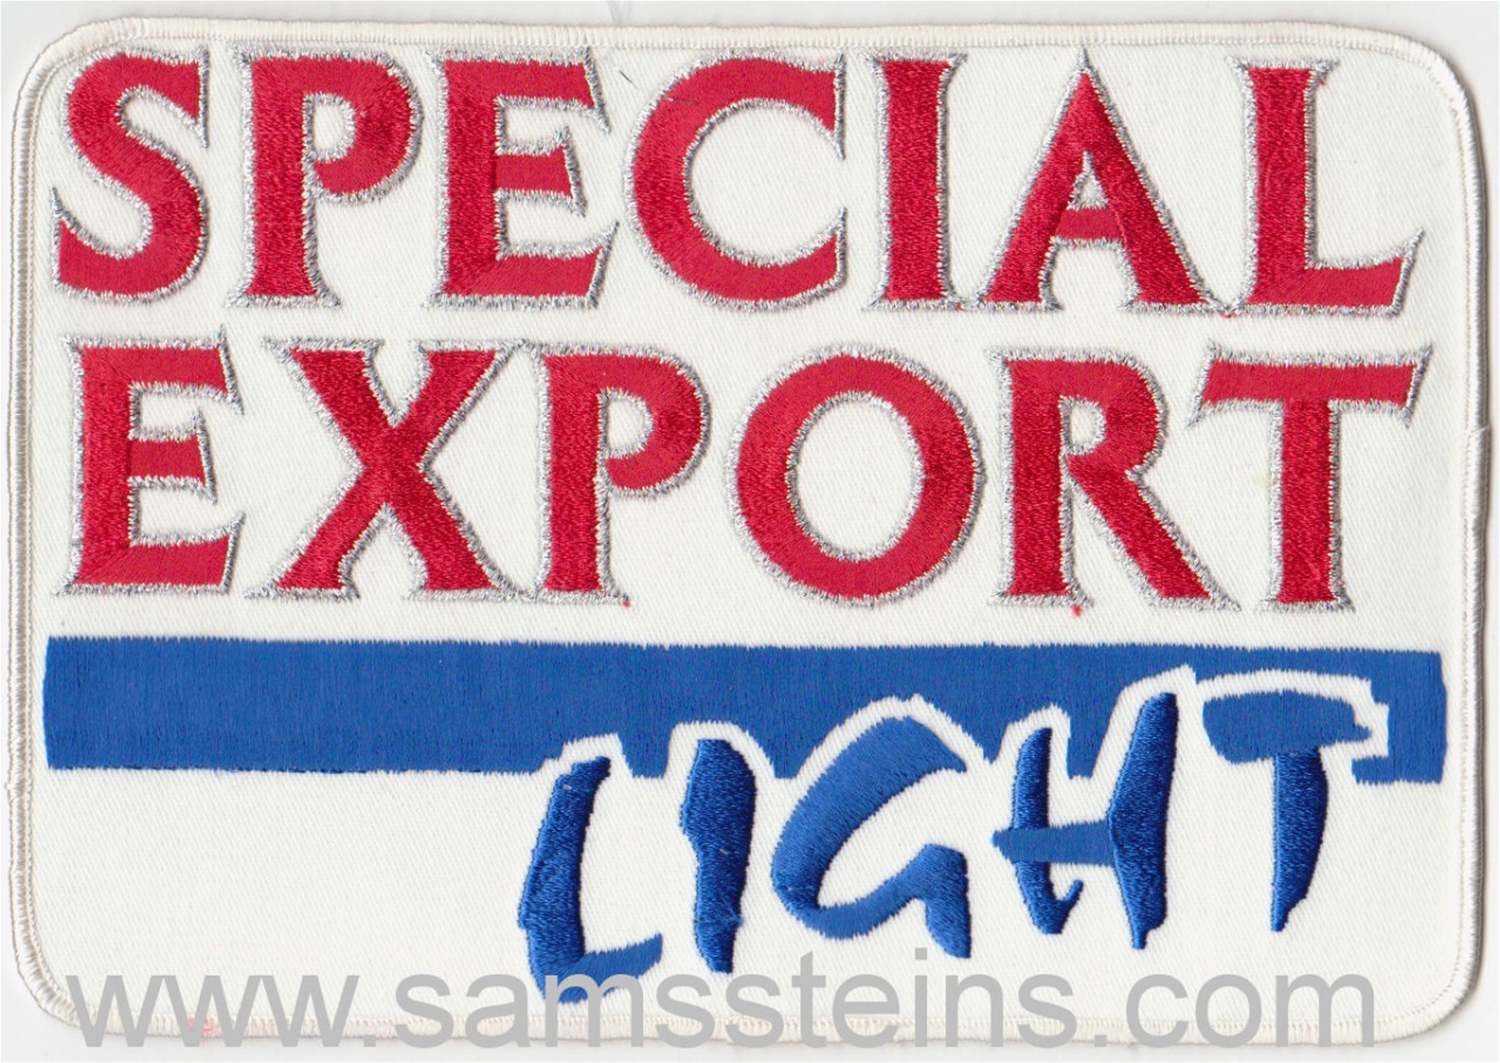 Special Export Light Large Beer Patch